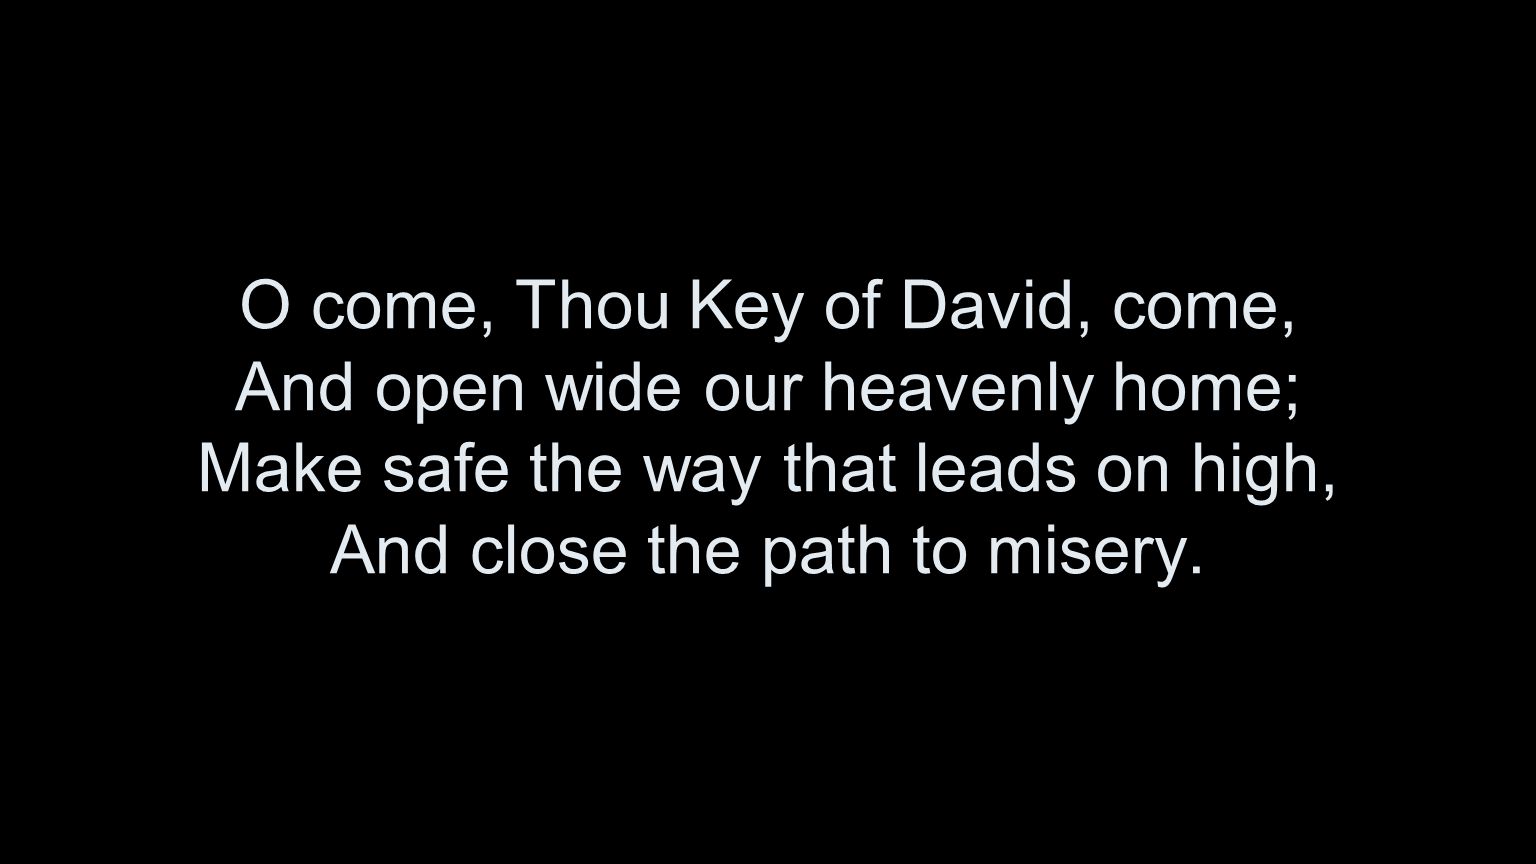 O come, Thou Key of David, come, And open wide our heavenly home; Make safe the way that leads on high, And close the path to misery.